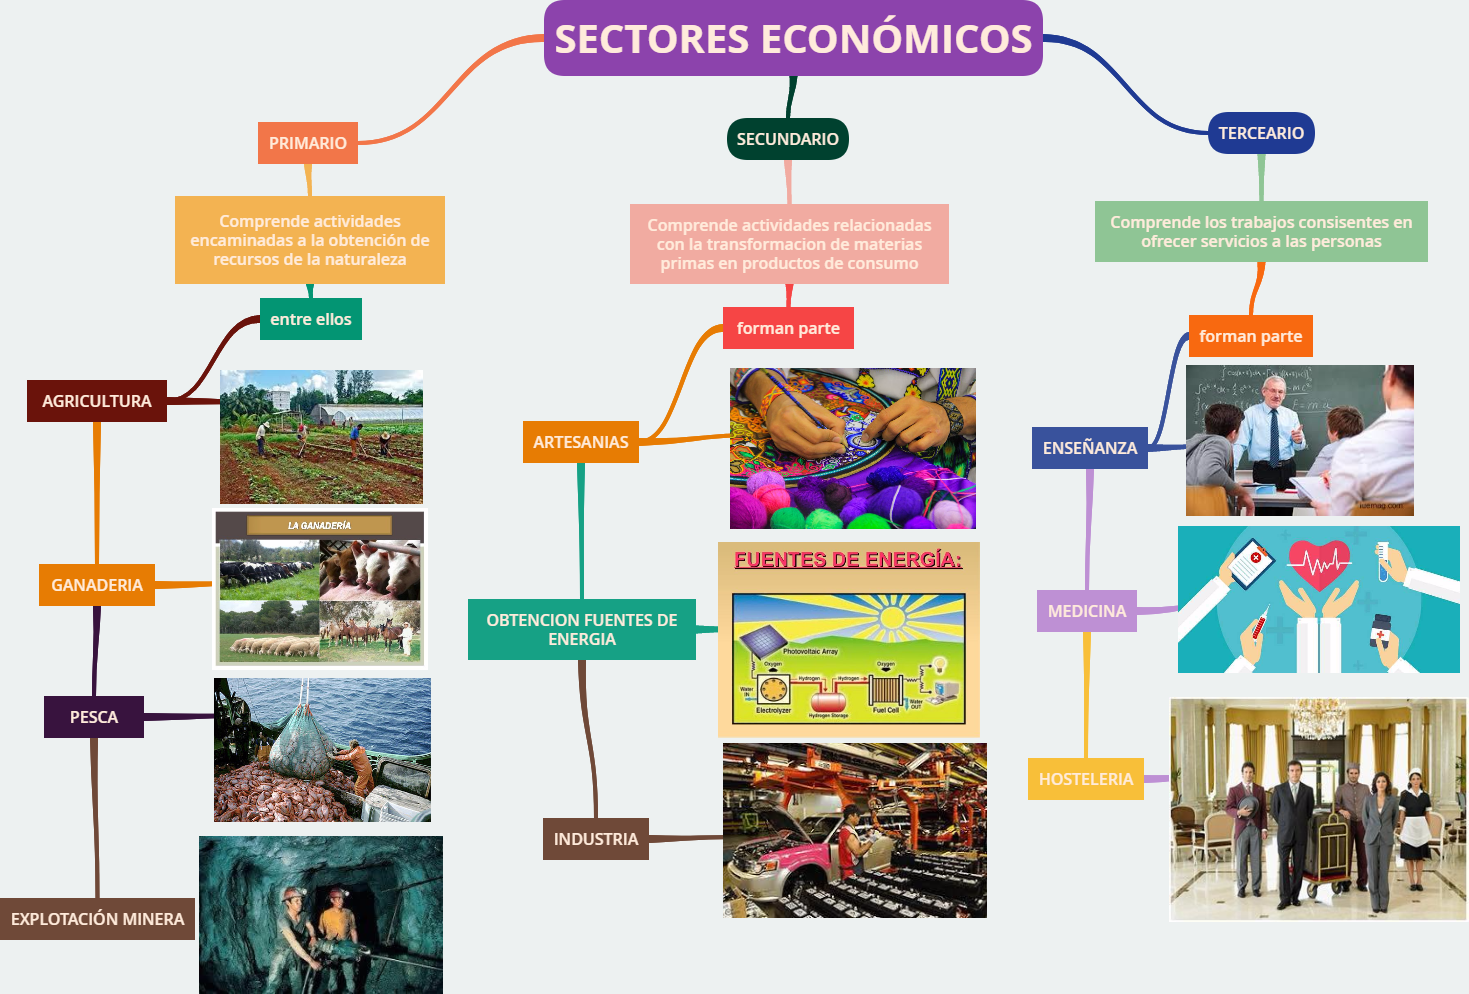 Attachment SECTORES ECONÓMICOS (3).png